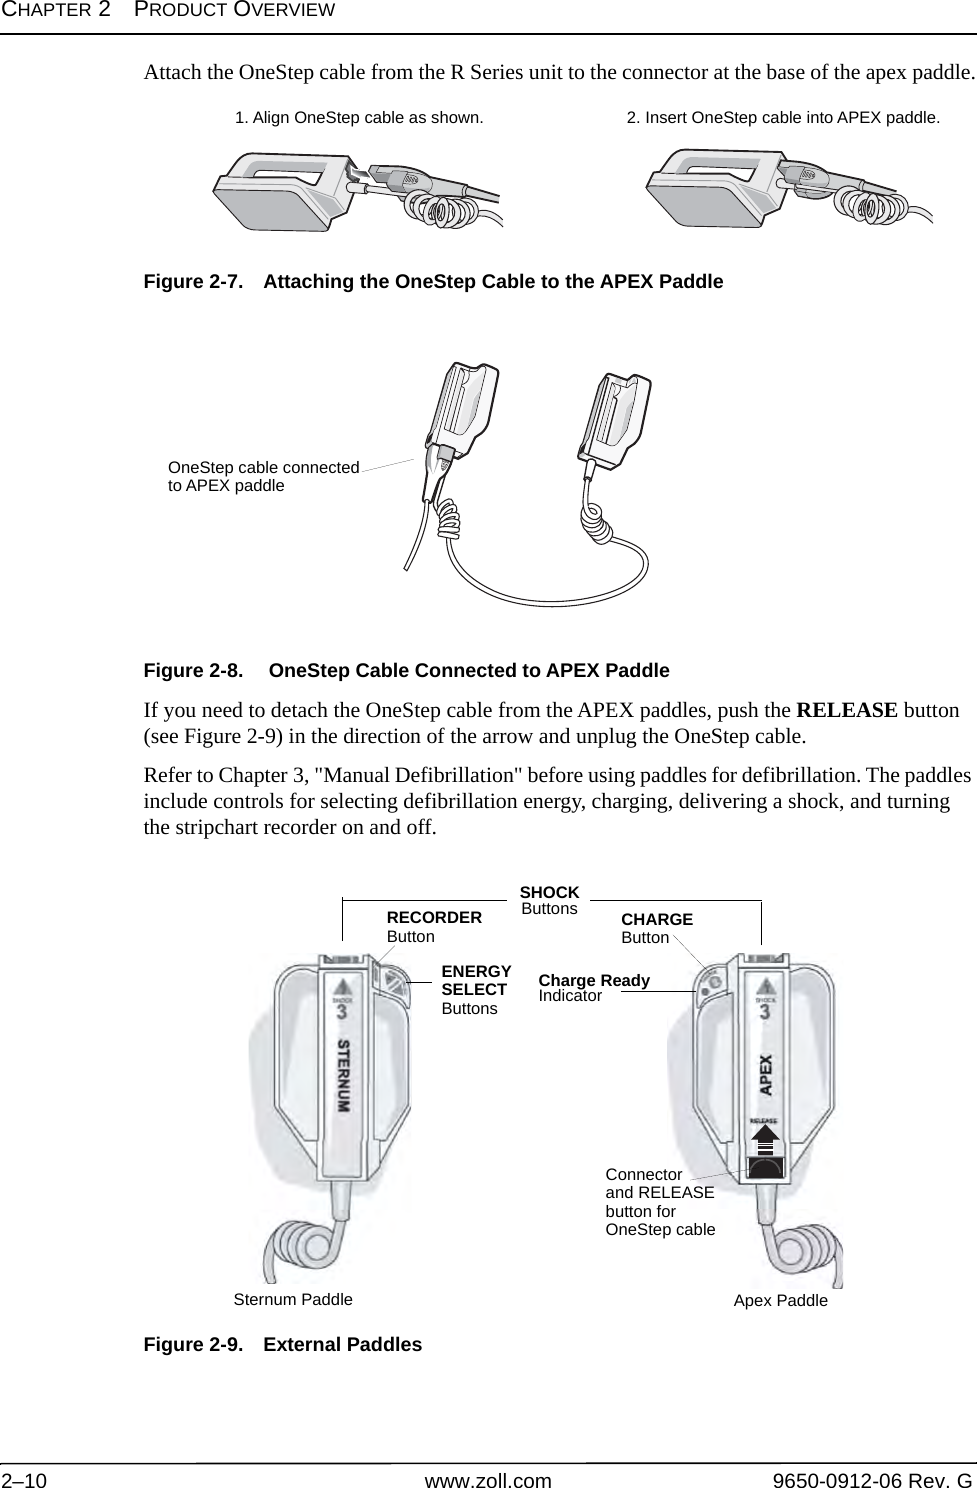 CHAPTER 2PRODUCT OVERVIEW2–10 www.zoll.com 9650-0912-06 Rev. GAttach the OneStep cable from the R Series unit to the connector at the base of the apex paddle.Figure 2-7. Attaching the OneStep Cable to the APEX PaddleFigure 2-8.  OneStep Cable Connected to APEX PaddleIf you need to detach the OneStep cable from the APEX paddles, push the RELEASE button (see Figure 2-9) in the direction of the arrow and unplug the OneStep cable.Refer to Chapter 3, &quot;Manual Defibrillation&quot; before using paddles for defibrillation. The paddles include controls for selecting defibrillation energy, charging, delivering a shock, and turning the stripchart recorder on and off.Figure 2-9. External Paddles1. Align OneStep cable as shown. 2. Insert OneStep cable into APEX paddle.OneStep cable connectedto APEX paddleSHOCK ButtonsRECORDERButtonENERGYSELECTButtonsCHARGEButtonCharge ReadyIndicatorSternum Paddle Apex PaddleConnectorand RELEASEbutton for OneStep cable